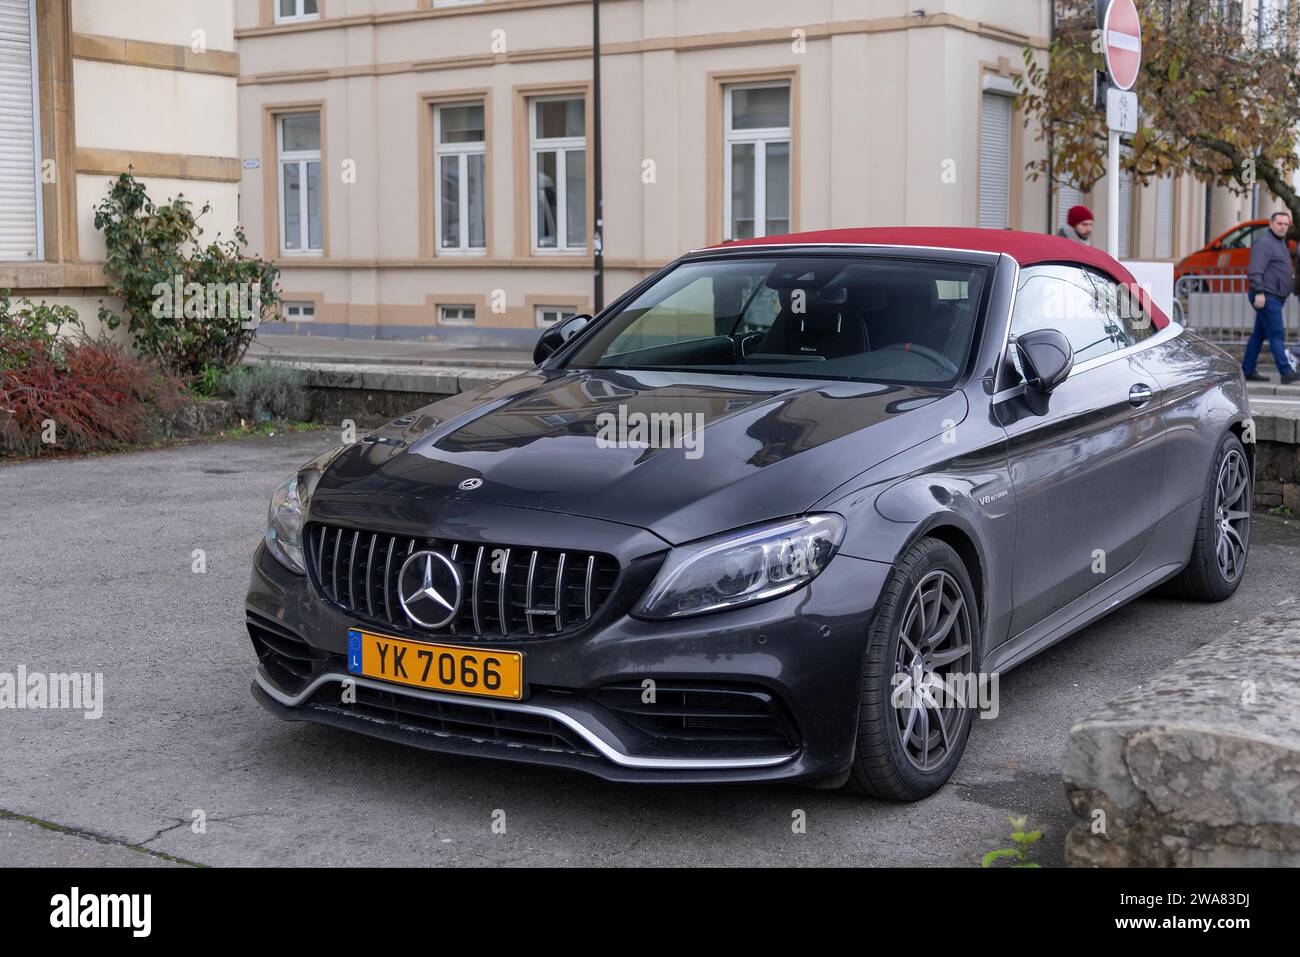 Luxembourg City, Luxembourg - Black Mercedes-AMG C 63 Cabriolet parked in a street. Stock Photo